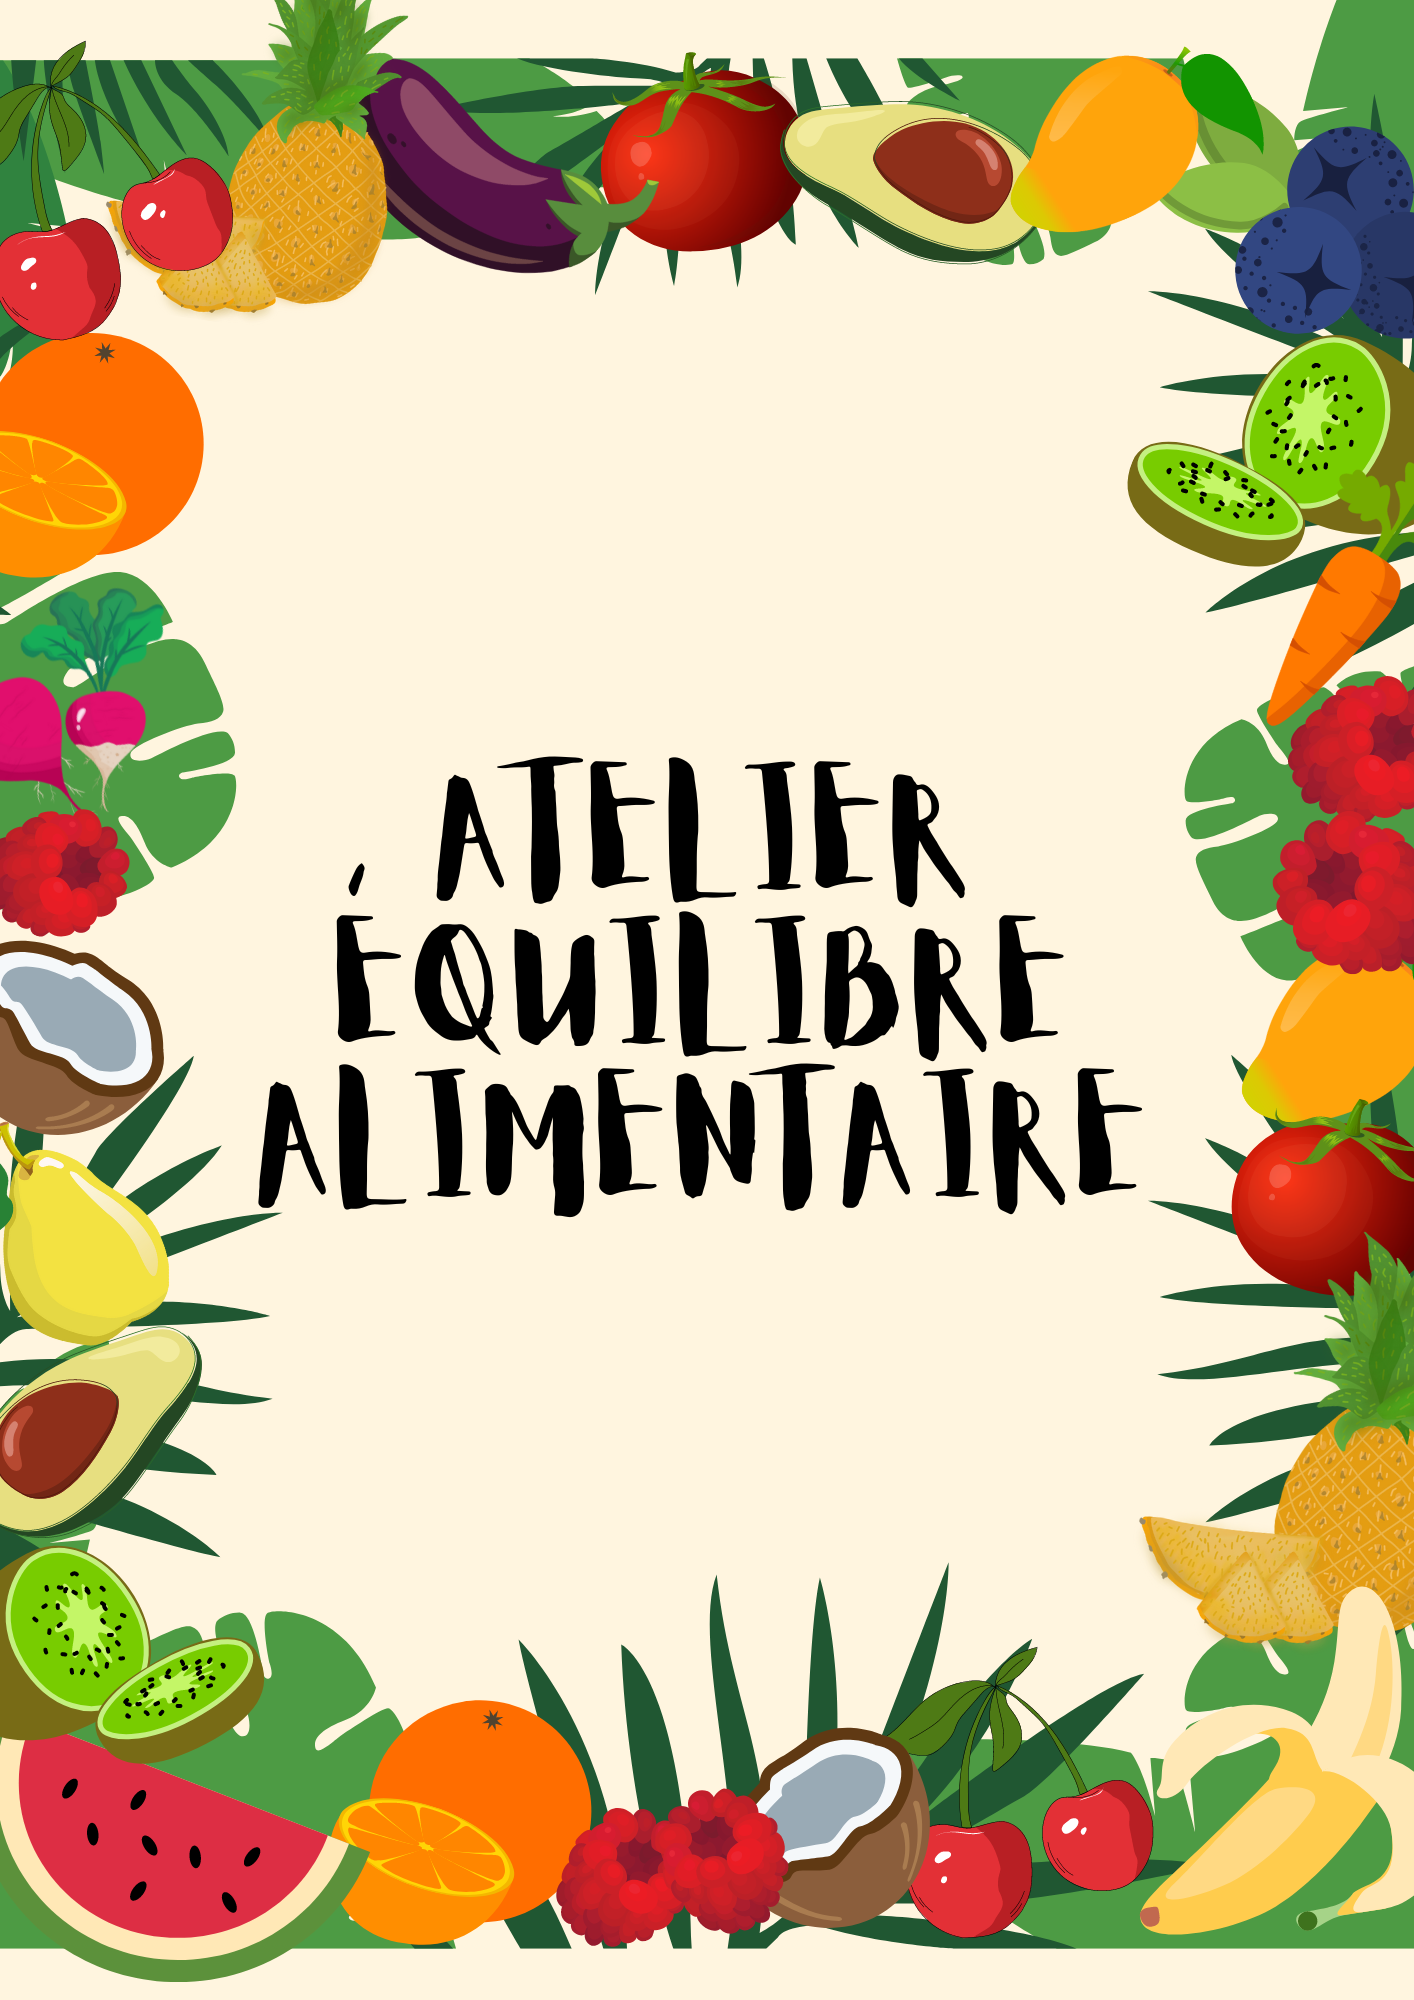 You are currently viewing Atelier équilibre alimentaire